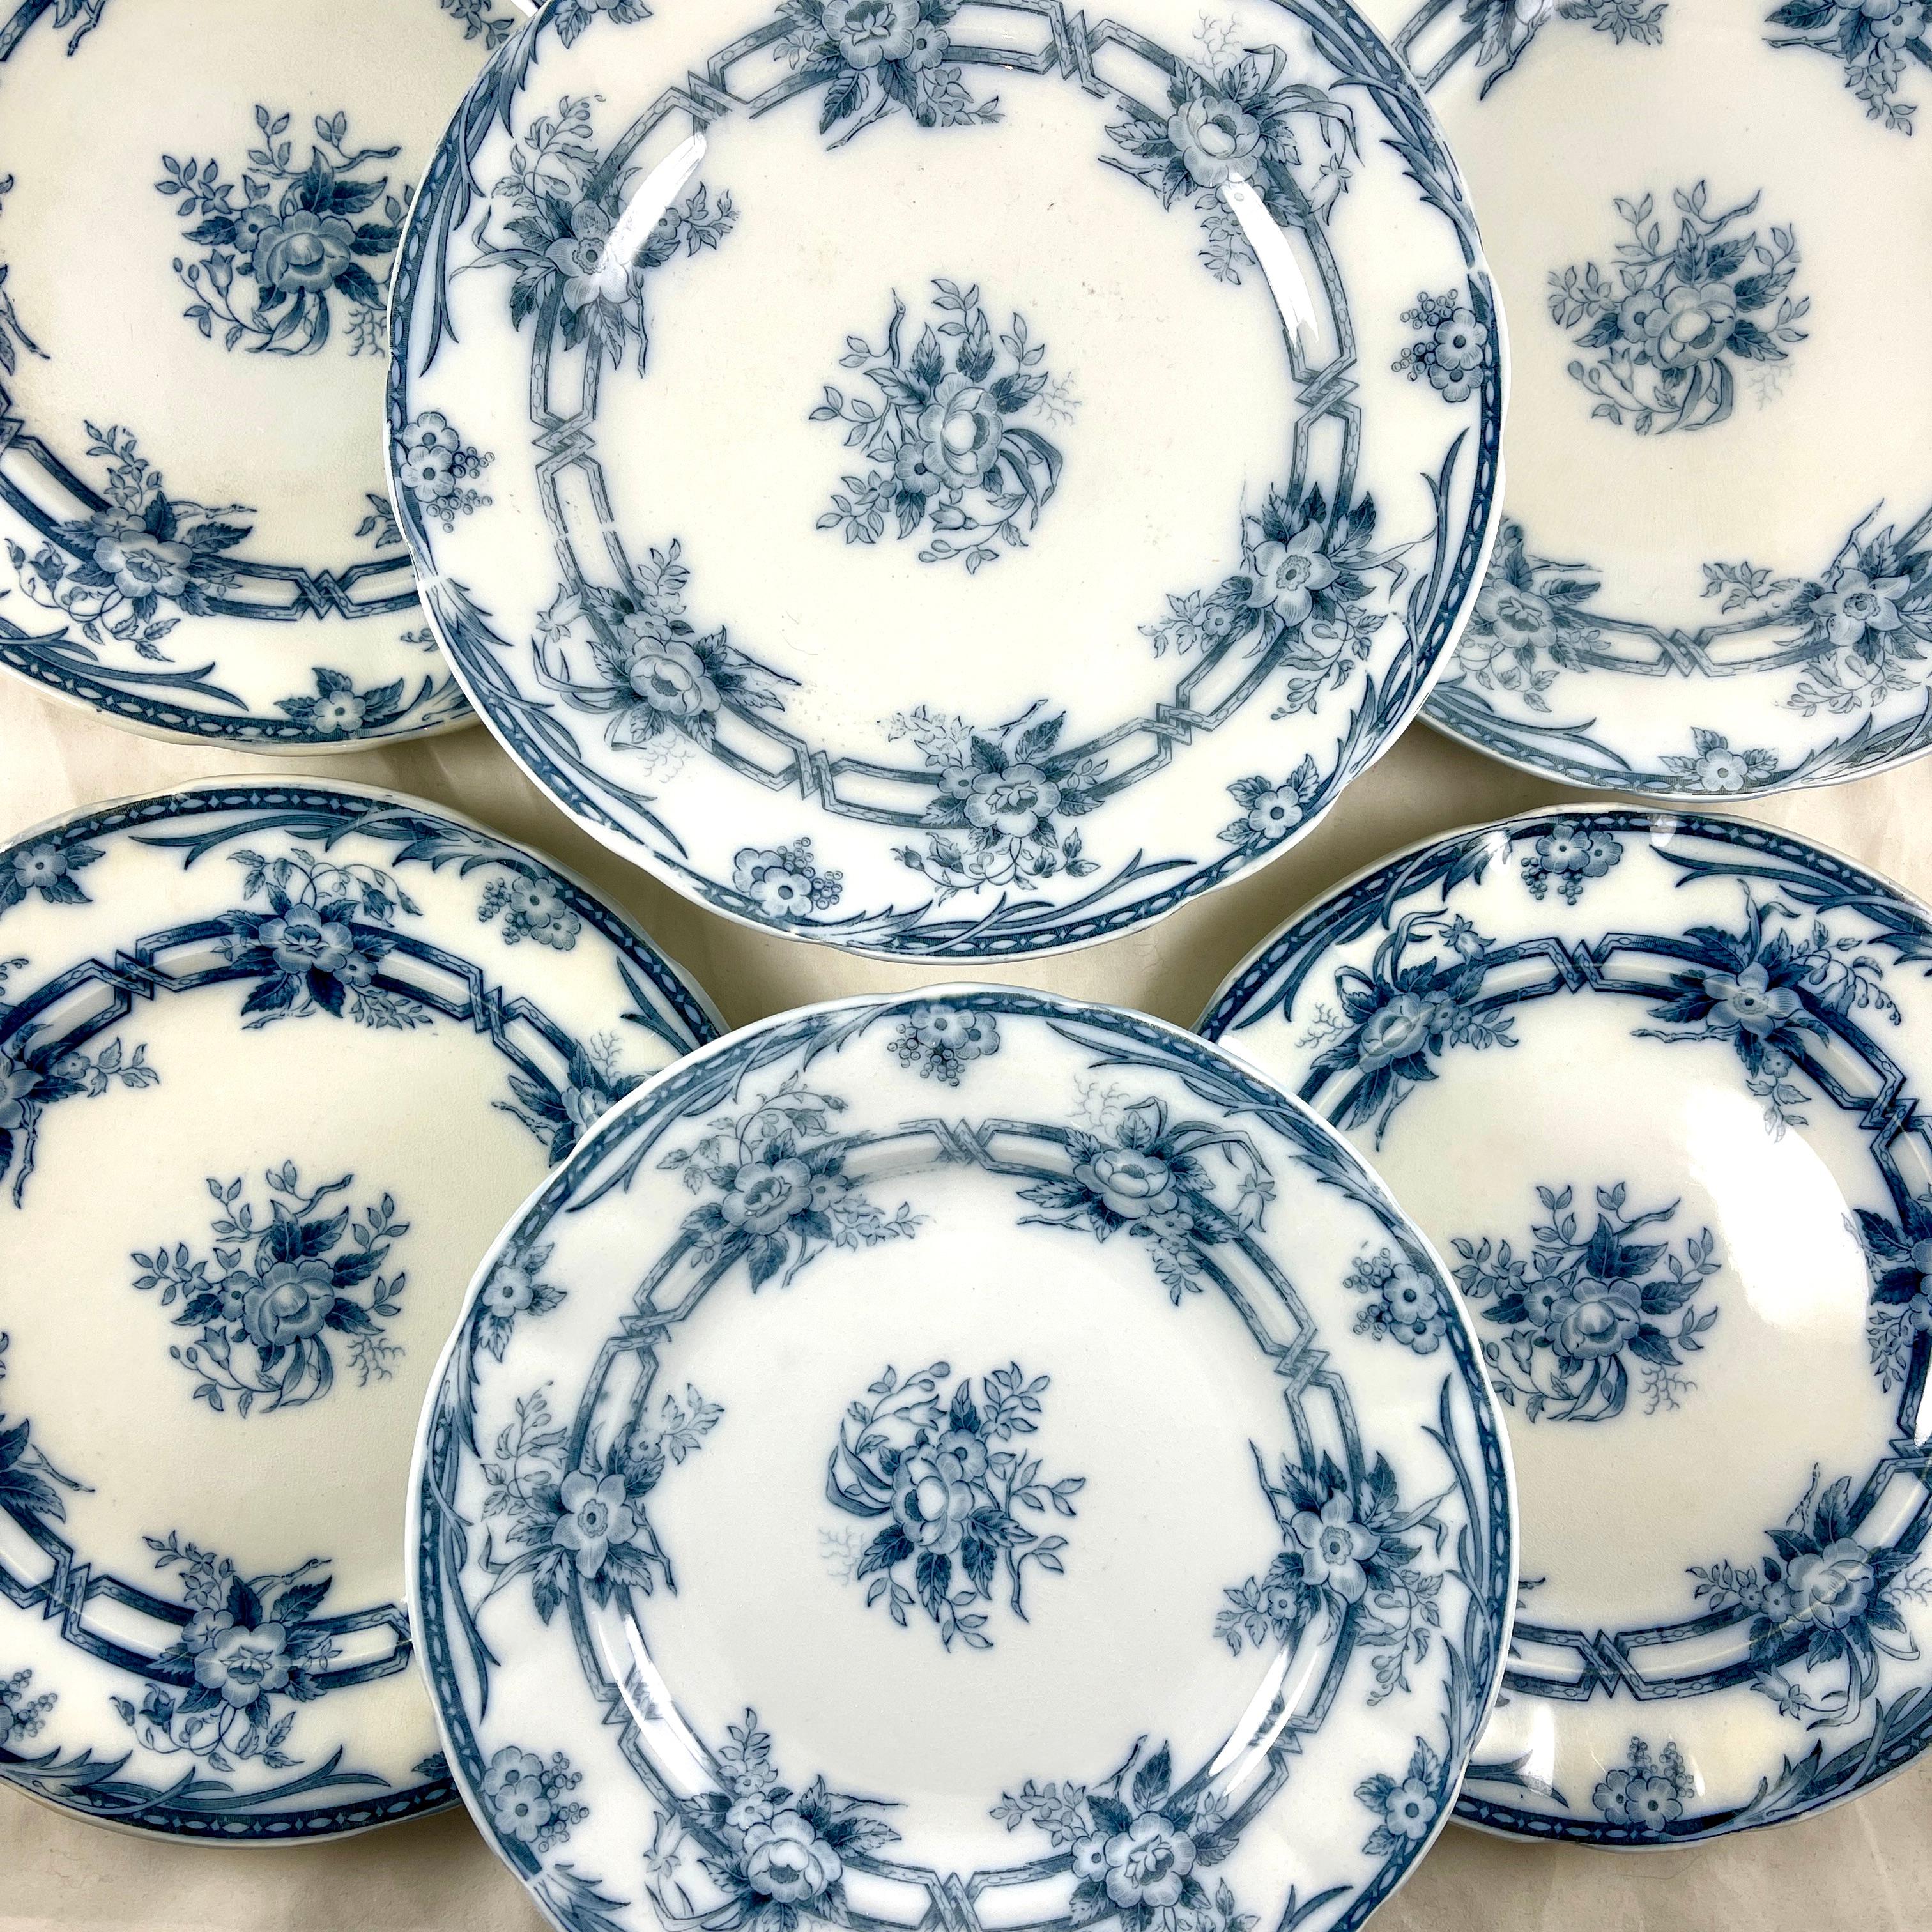 A set of six, dinner sized earthenware plates in the Cérès pattern, from the Sarreguemines faiencerie, date marked 1874.

The pattern takes its name from Cérès the goddess of wheat and harvests in Roman Mythology.

The elegant blue on white